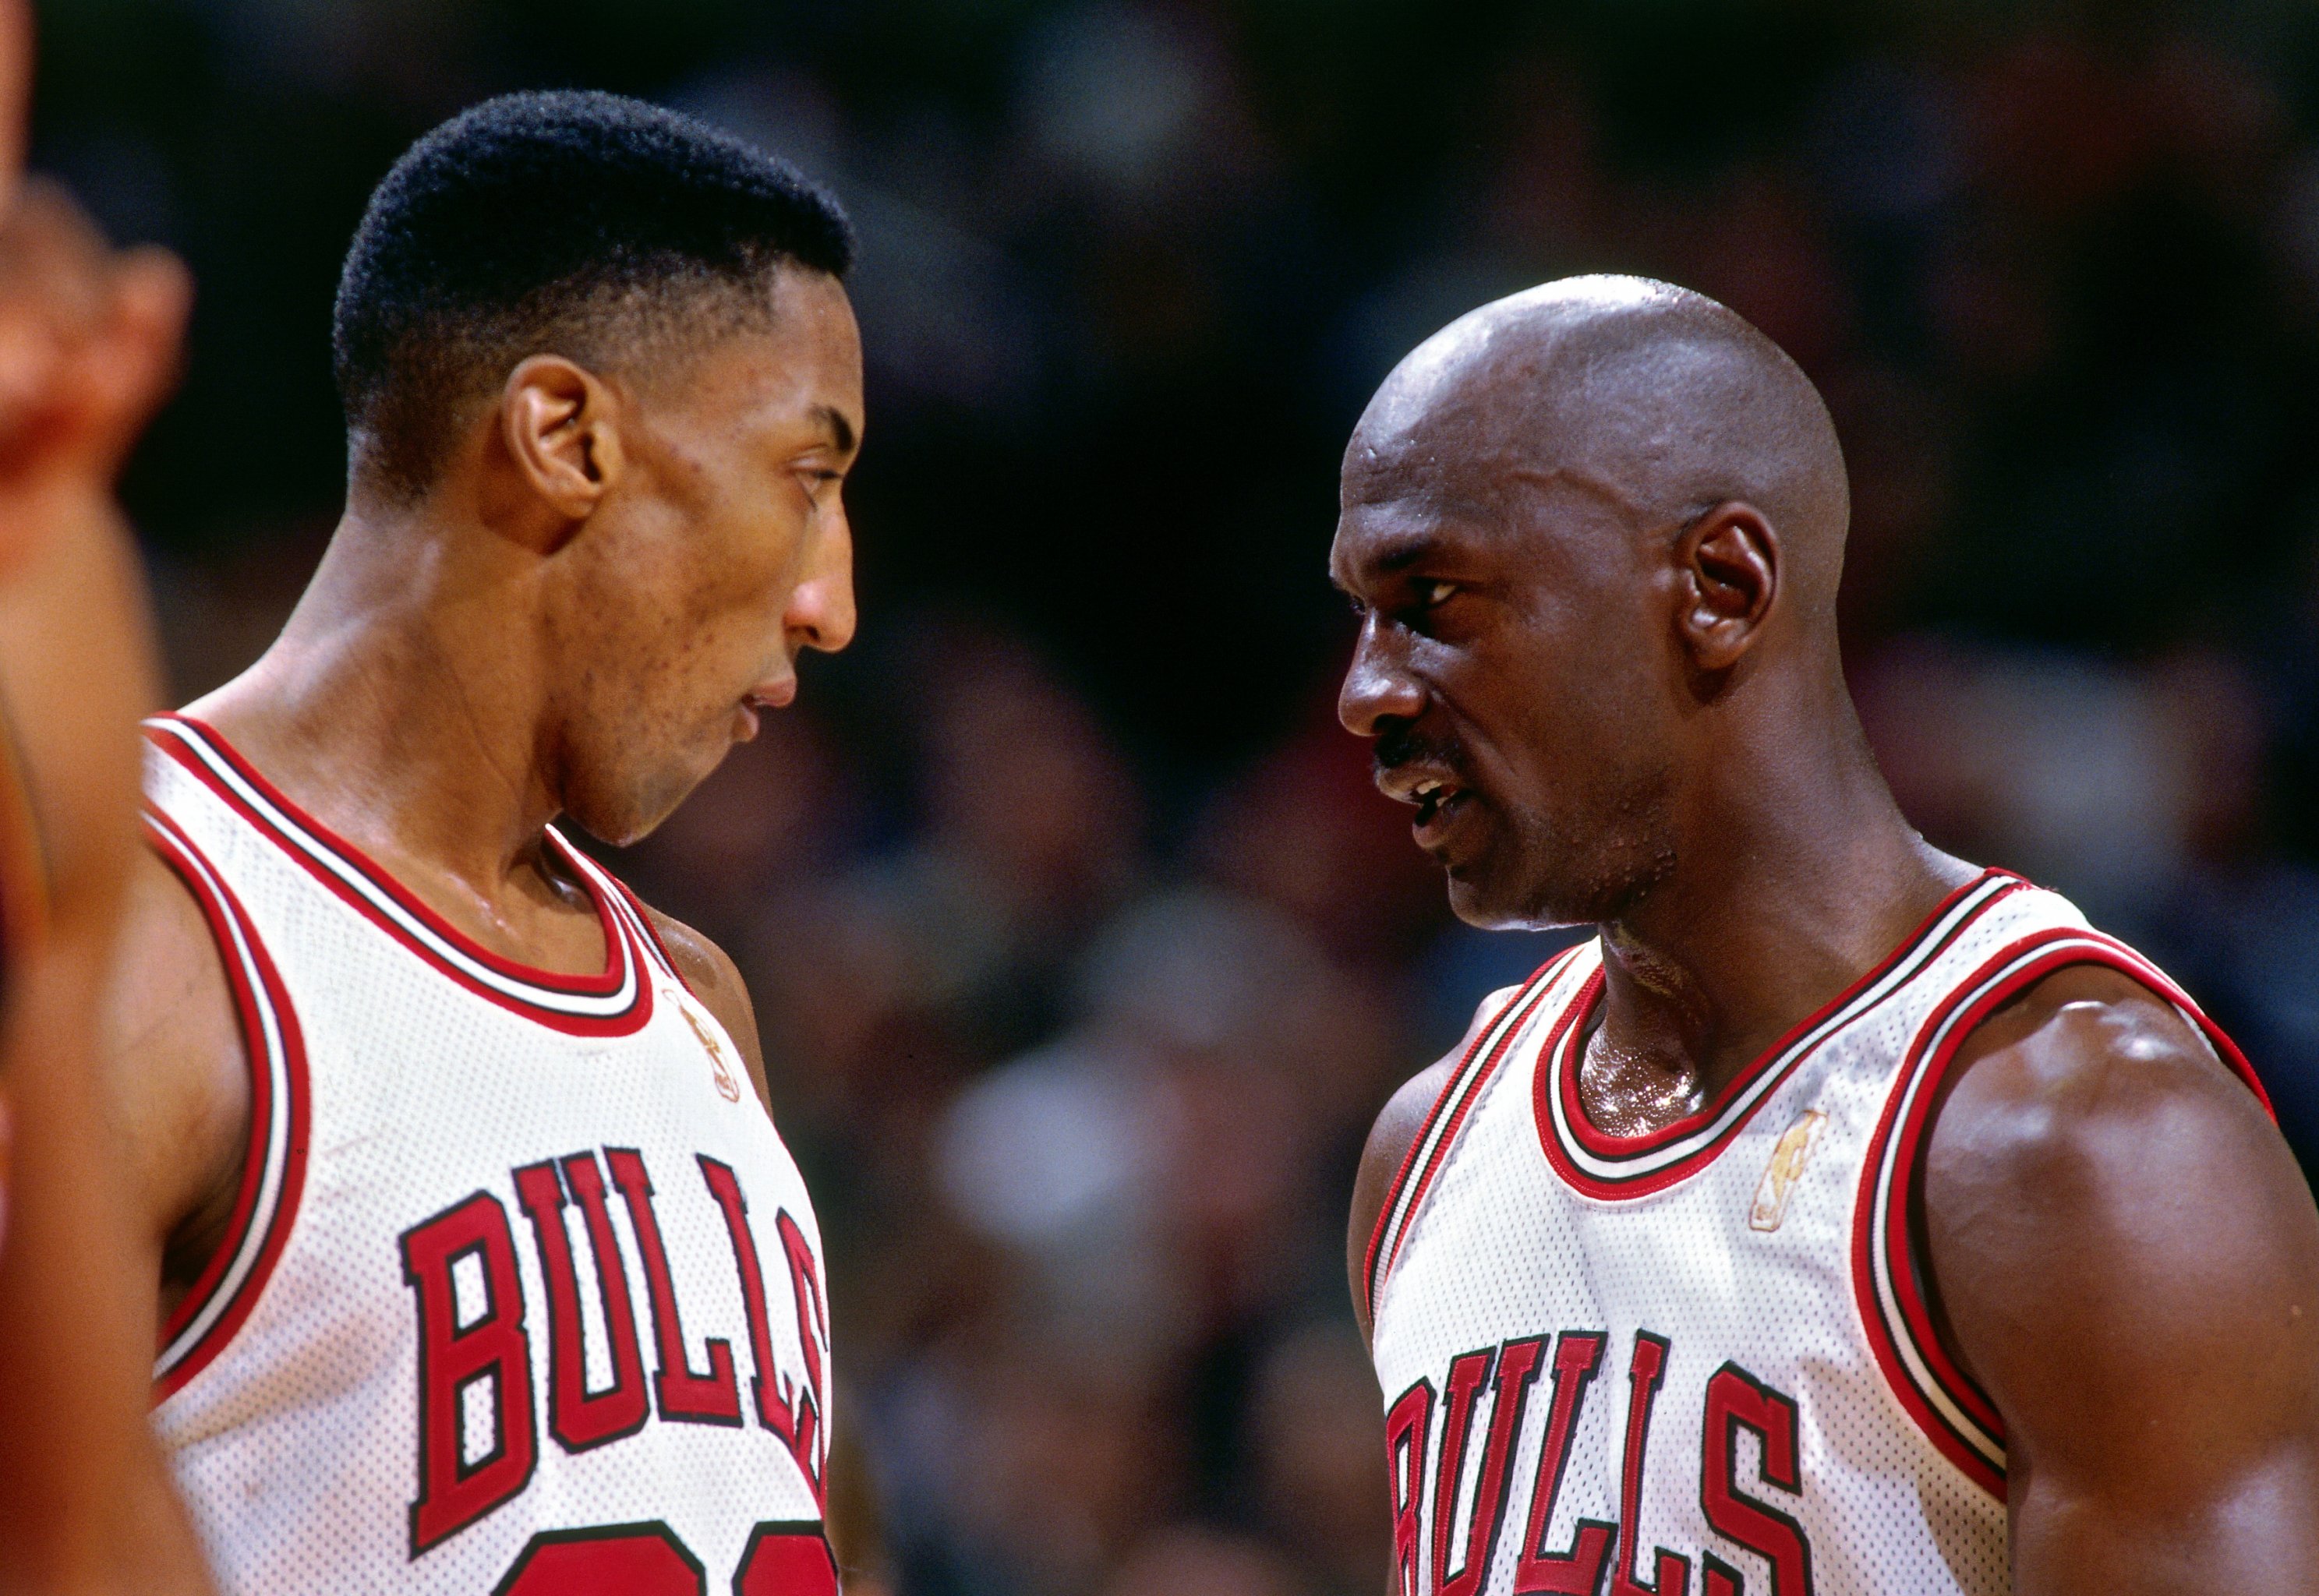 Pippen stood tall without Jordan in 1993-94